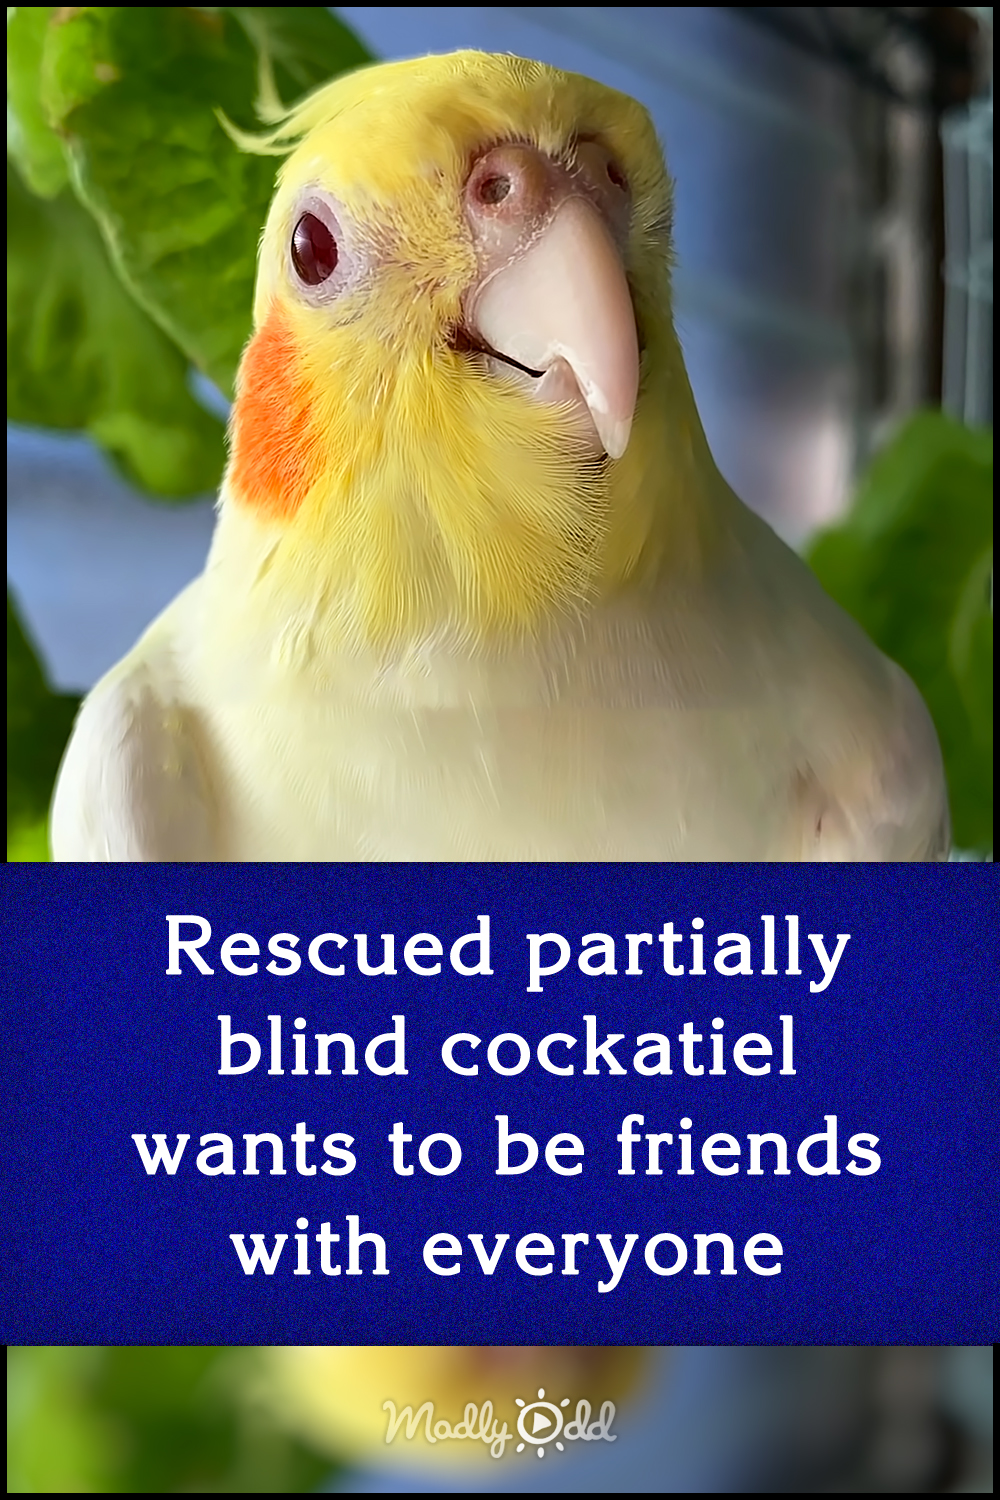 Rescued partially blind cockatiel wants to be friends with everyone